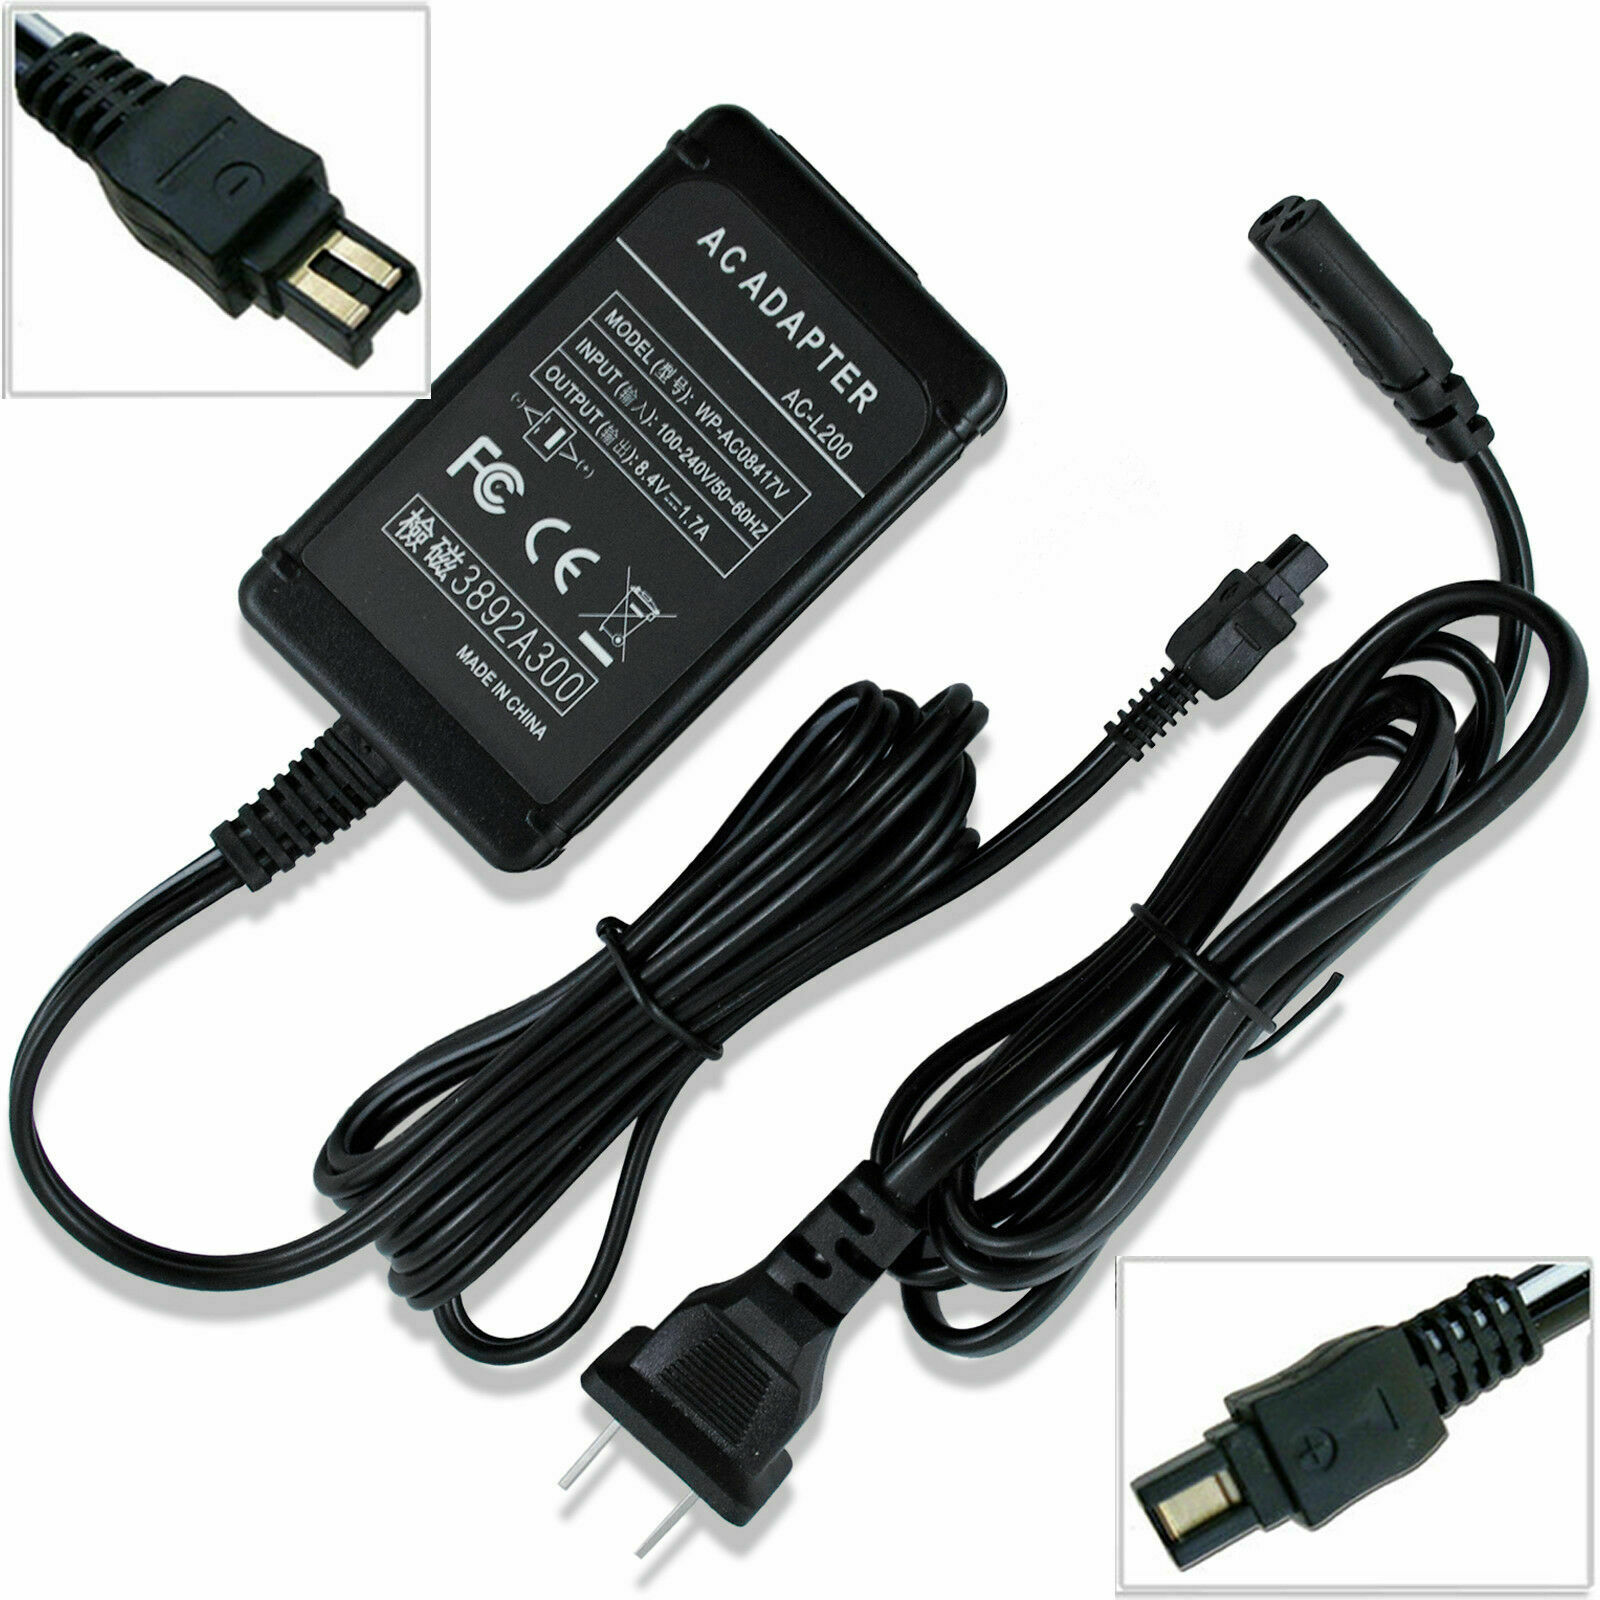 AC Adapter Charger For Sony HandyCam DCR-DVD650 DCR-DVD650E DCR-DVD710 DCR-SX85 To Fit: Camera MPN: Does not apply - Click Image to Close